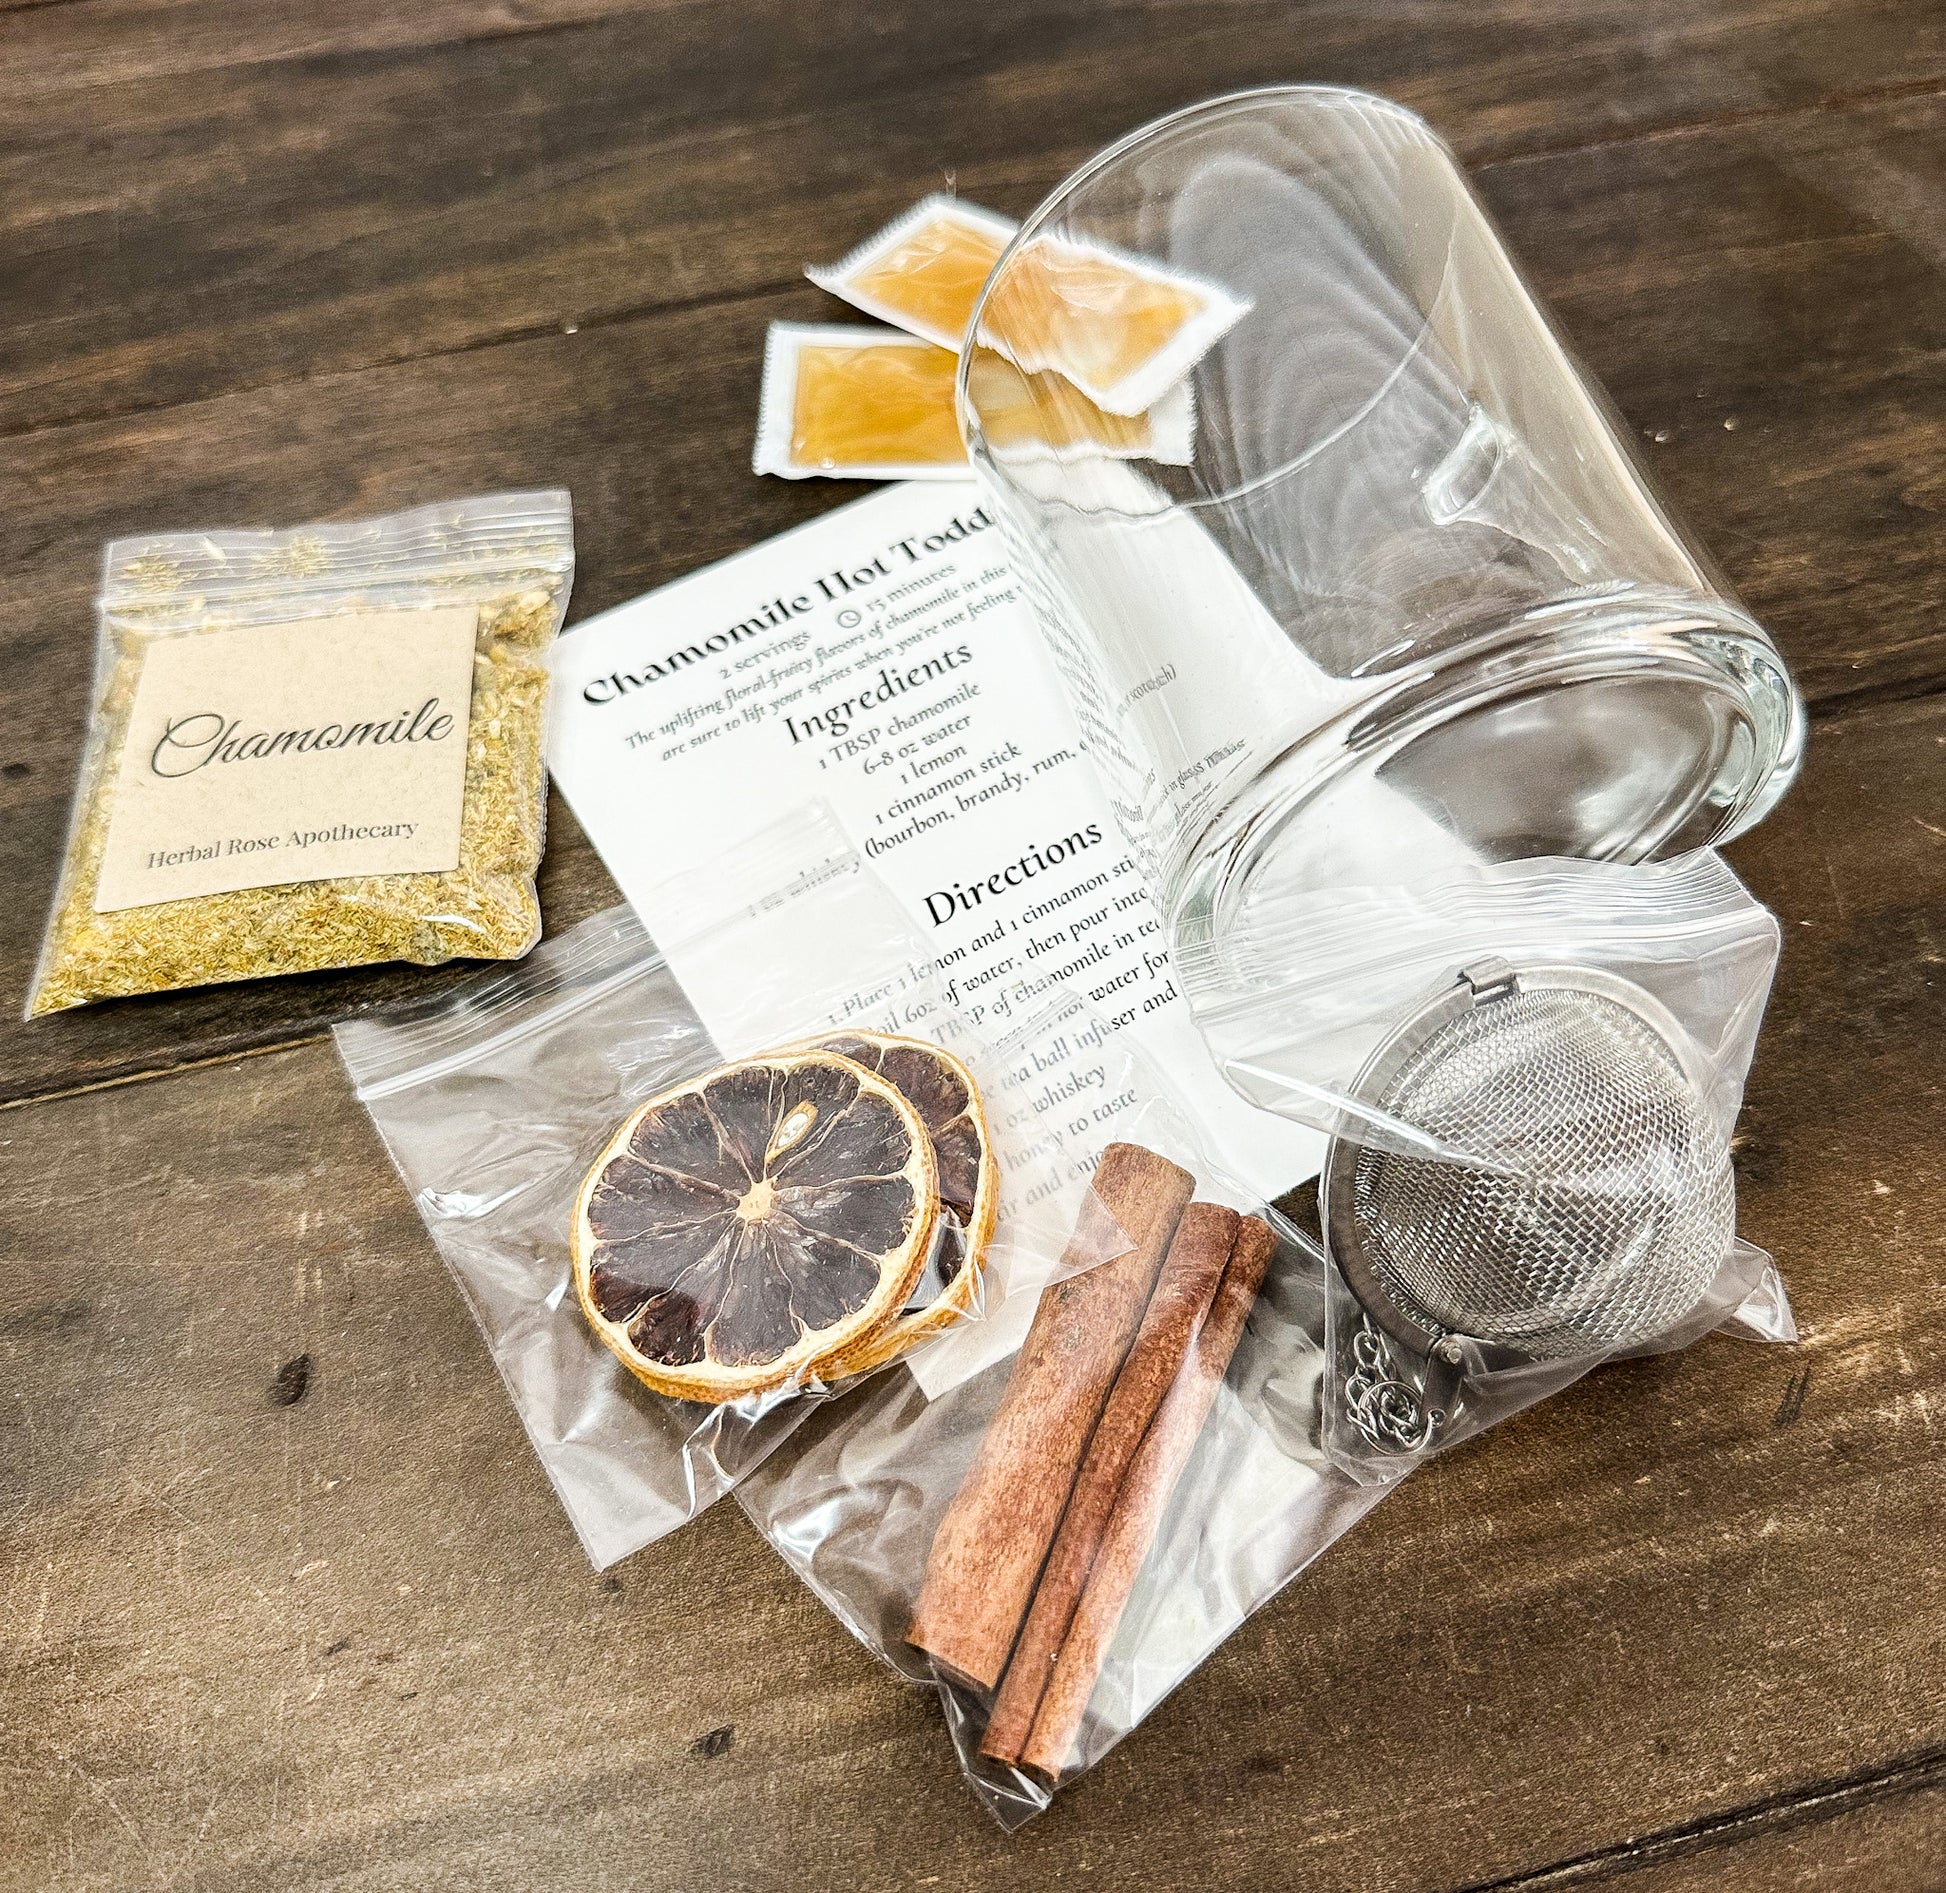 chamomile hot toddy gift set contents inside on wooden table